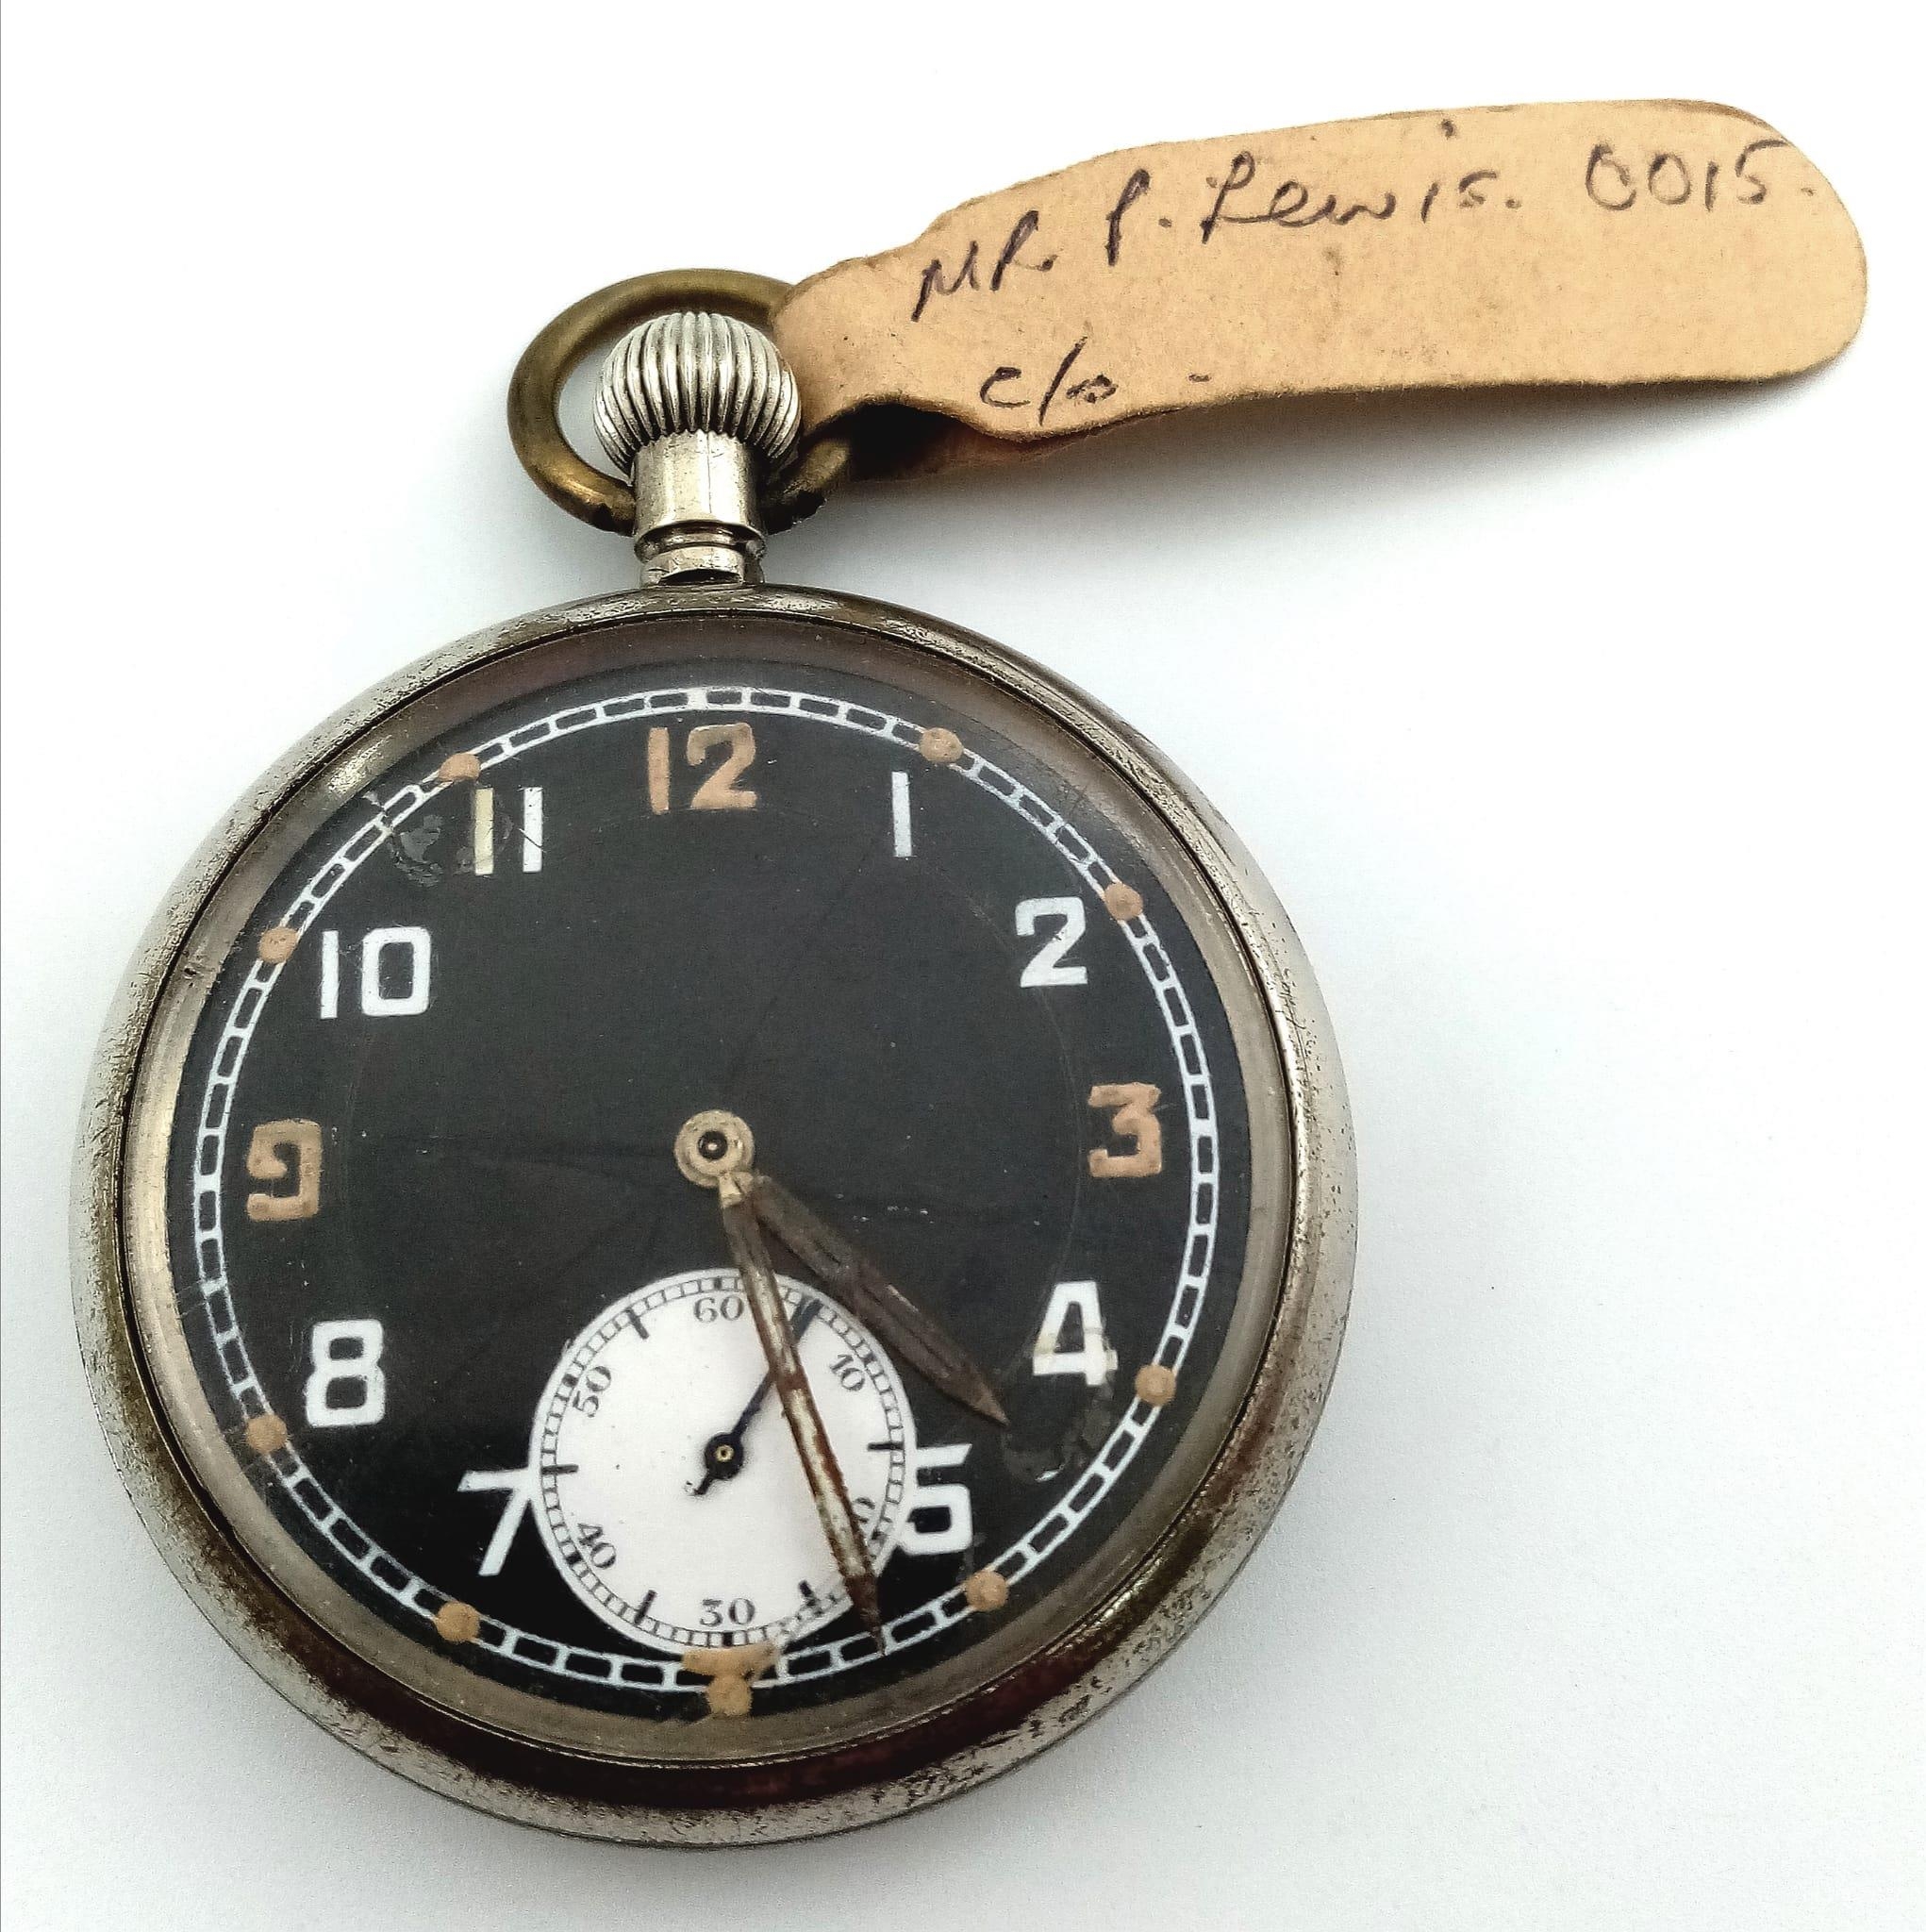 A WW2 British Officers Pocket Watch. 15 jewels. Top winder. In working order. Military markings on